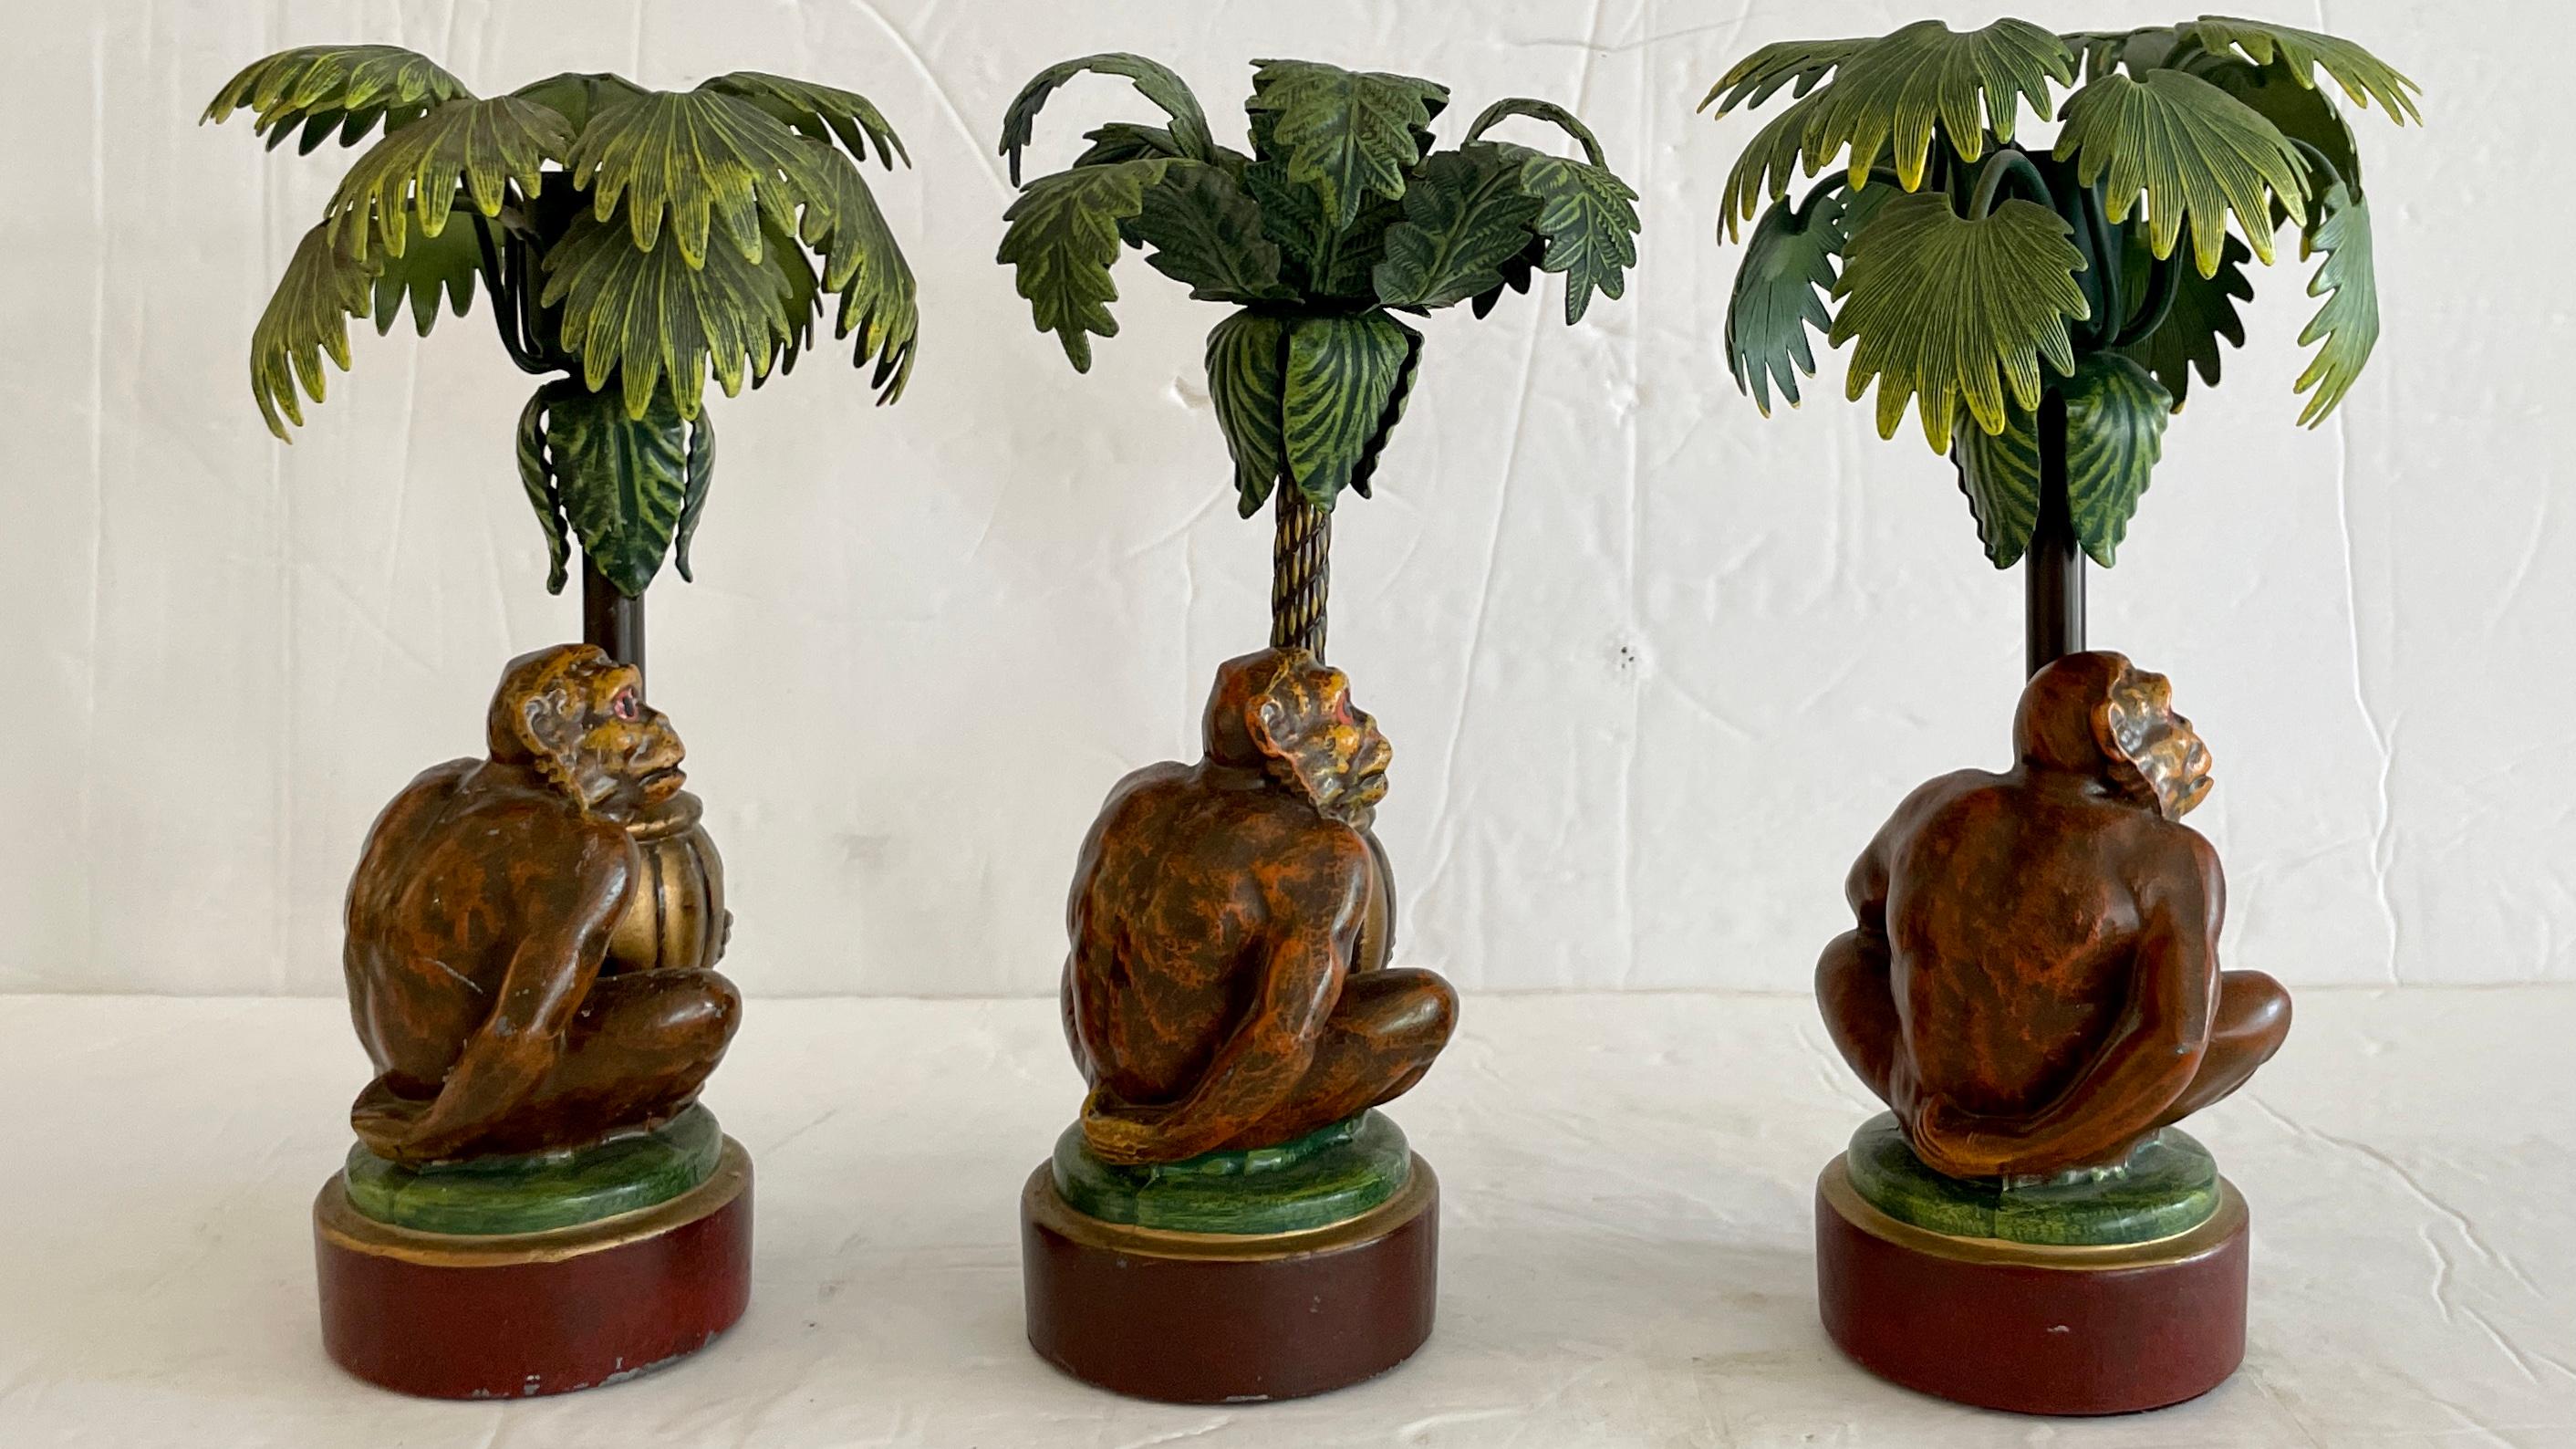 Monkeys Tole Metal Candlestick Holders - Set of 3 In Good Condition For Sale In Los Angeles, CA